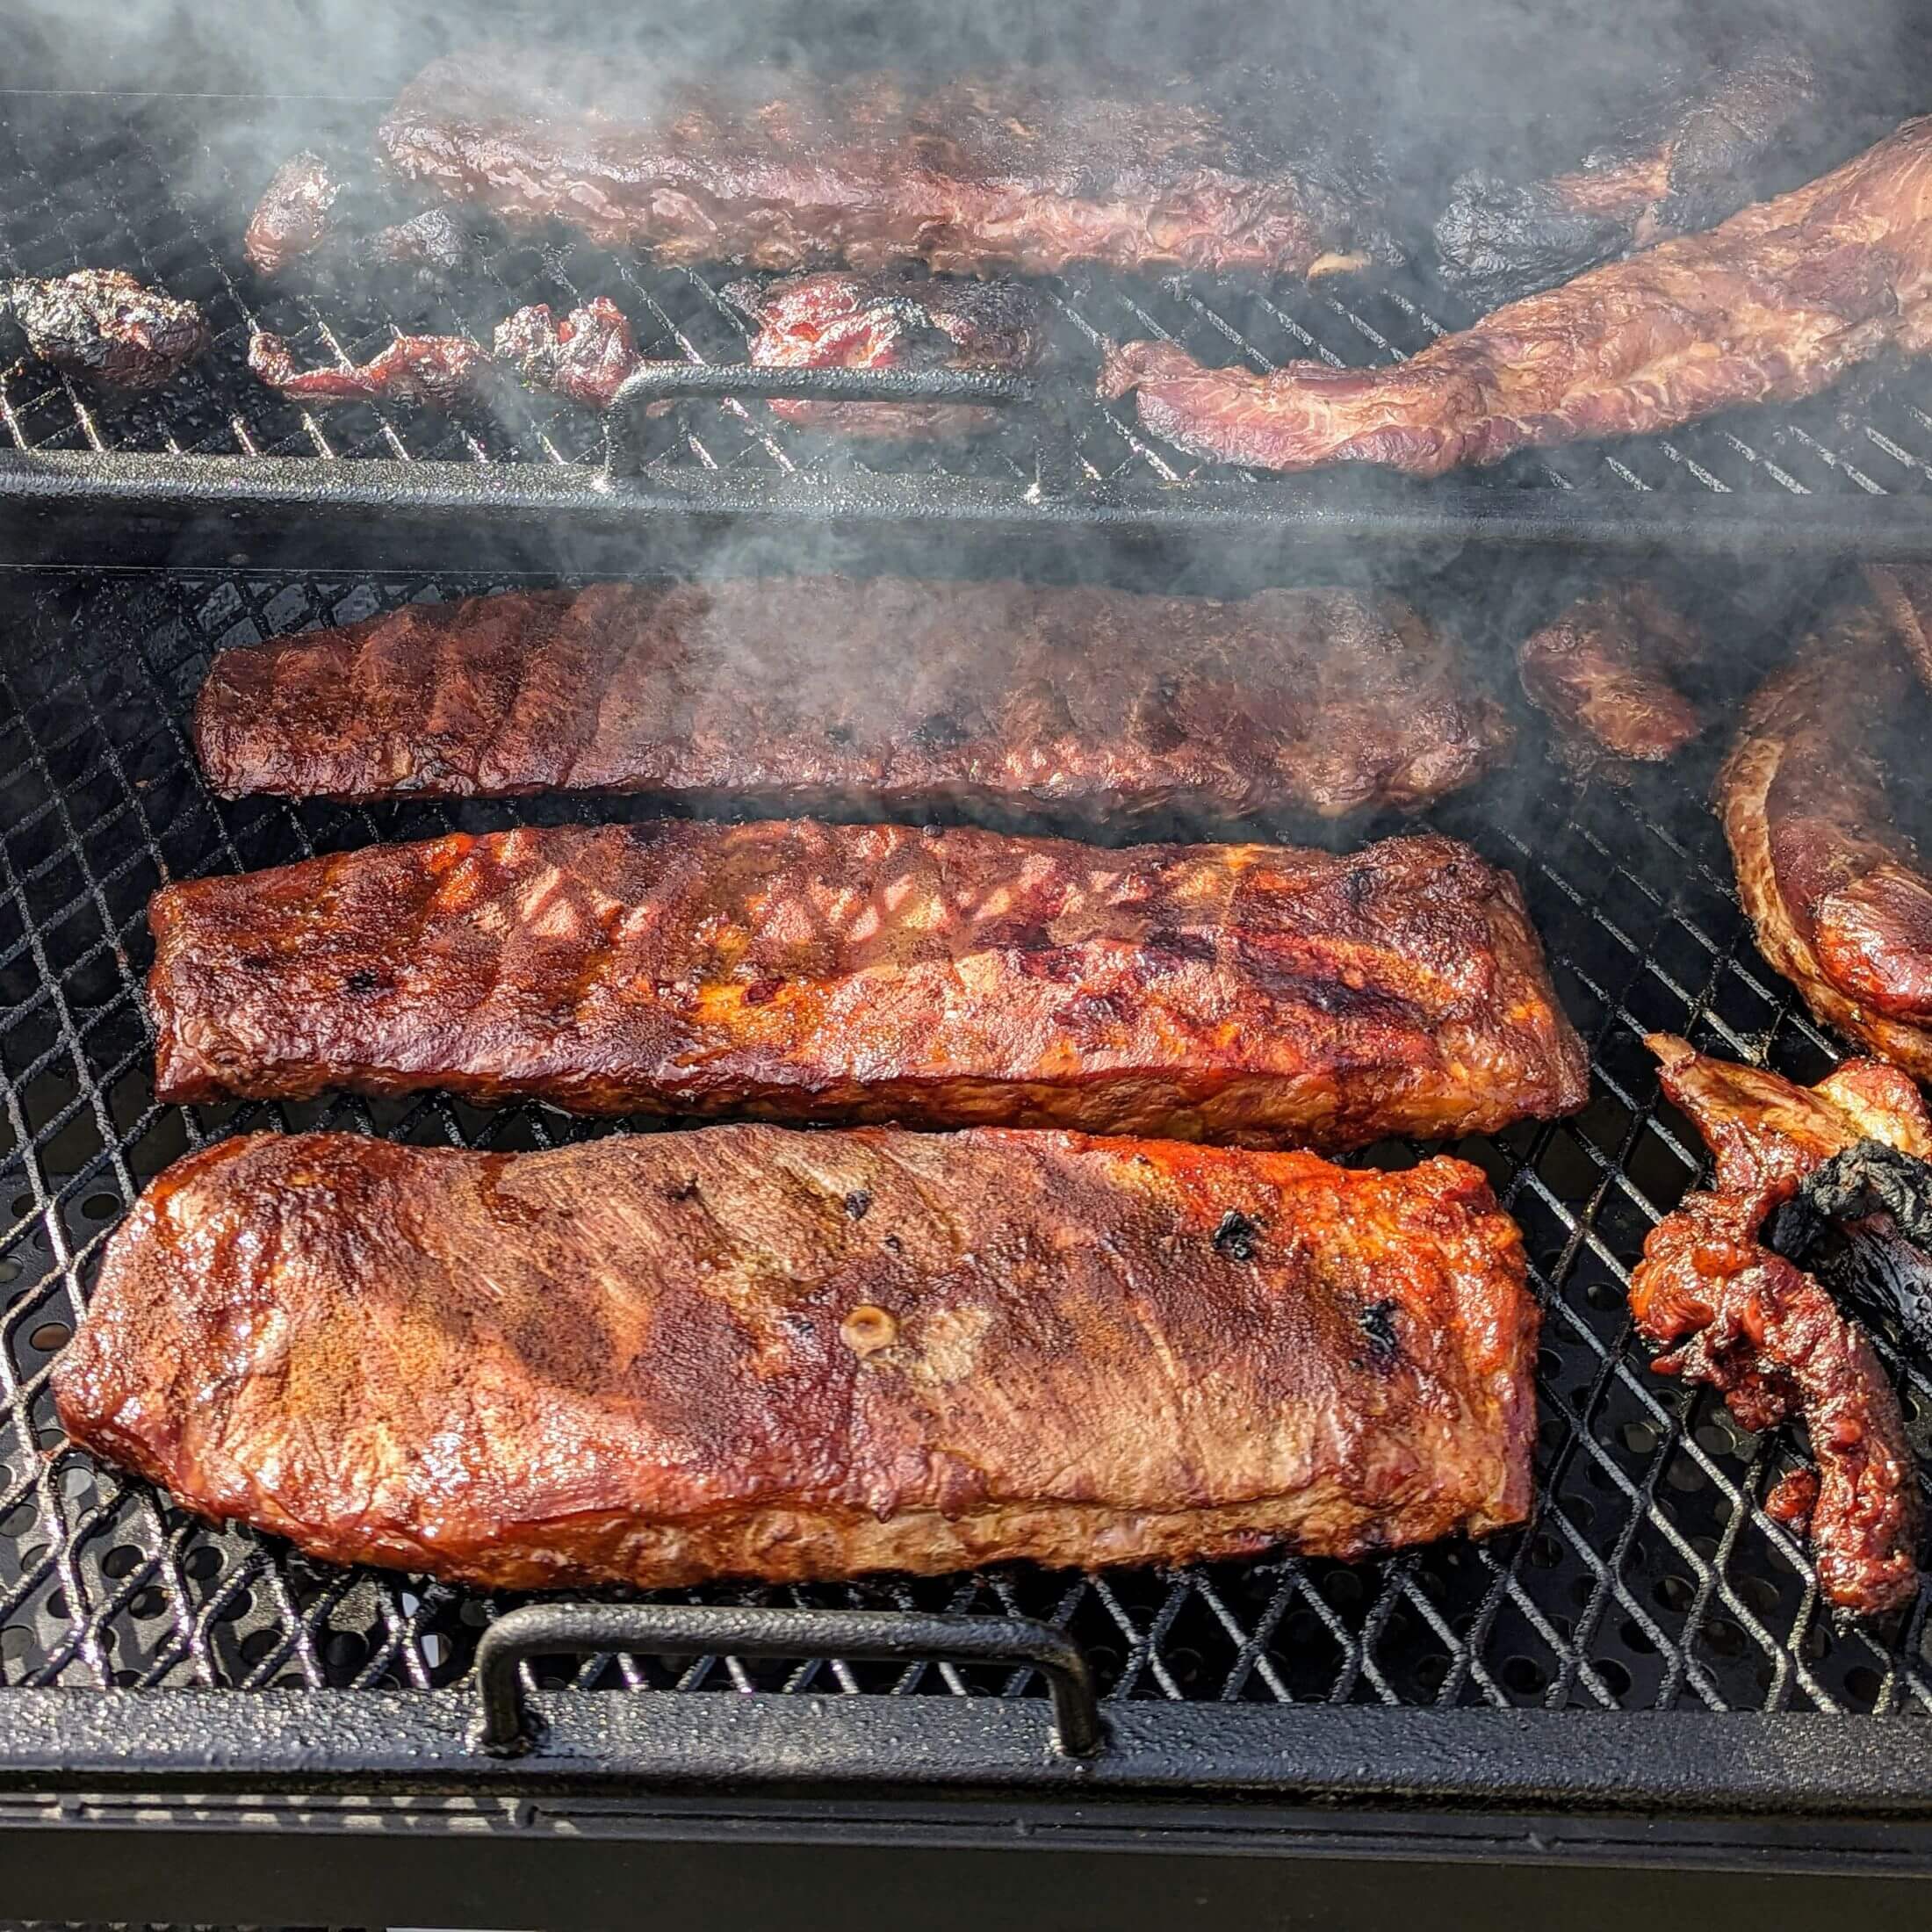 Pork Ribs on the grill